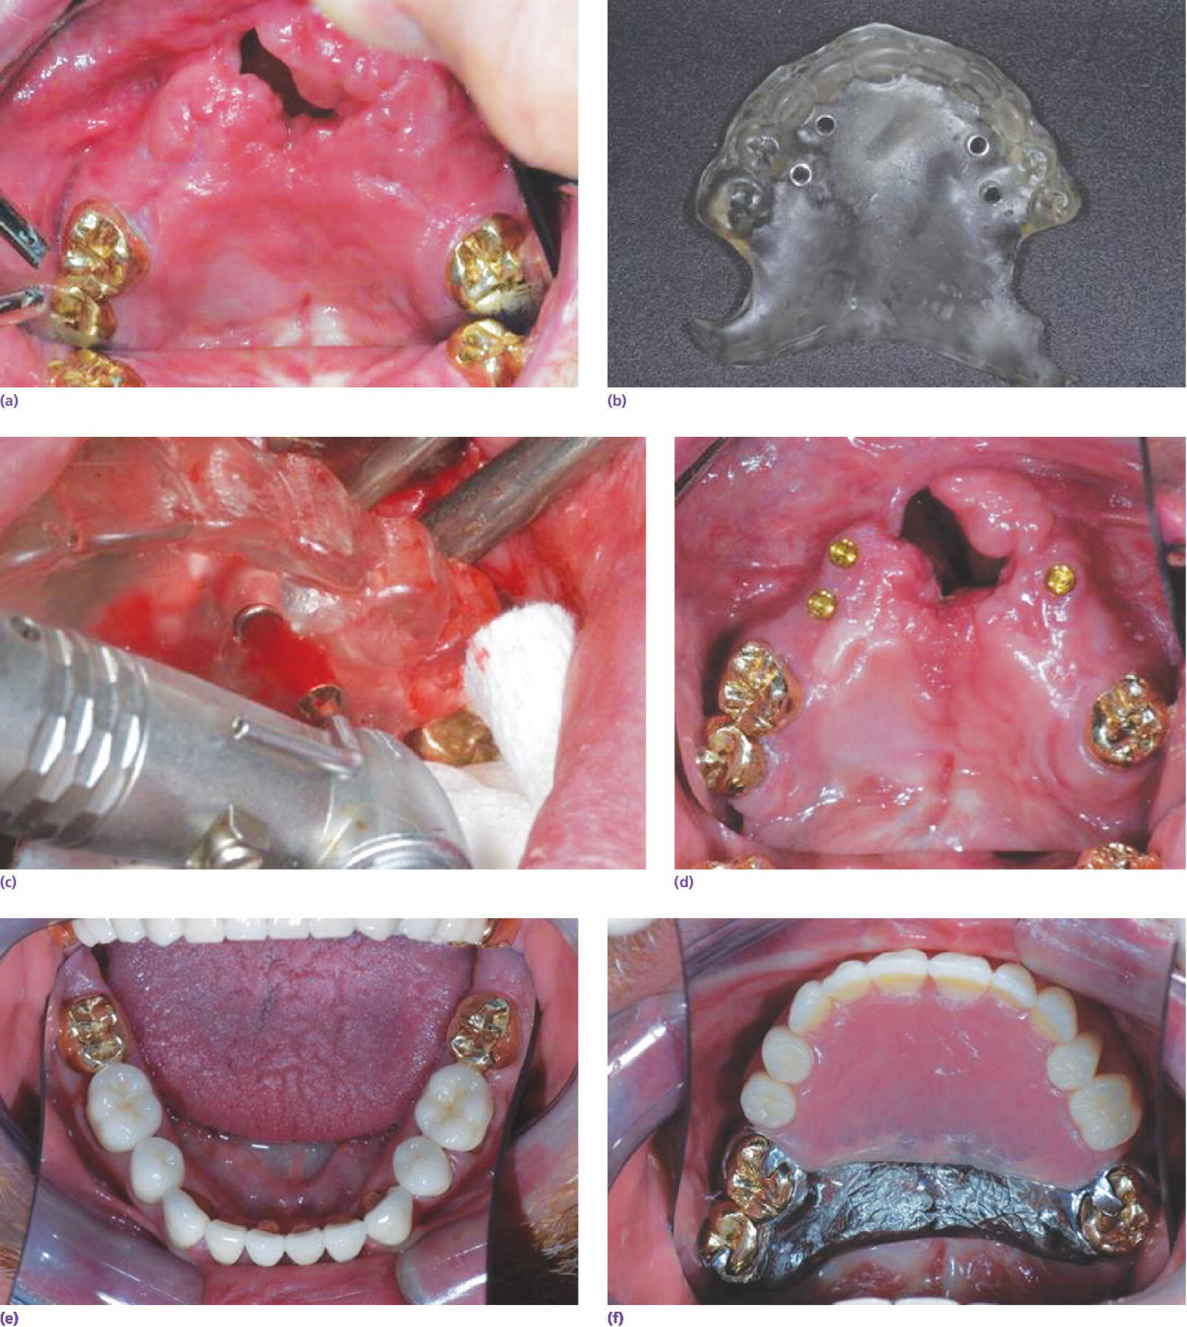 7 Photos of partially repaired cleft displaying surveyed crowns, surgical template, implant sites, implants in position, restored mandibular dentition, and completed overlay removable partial denture.